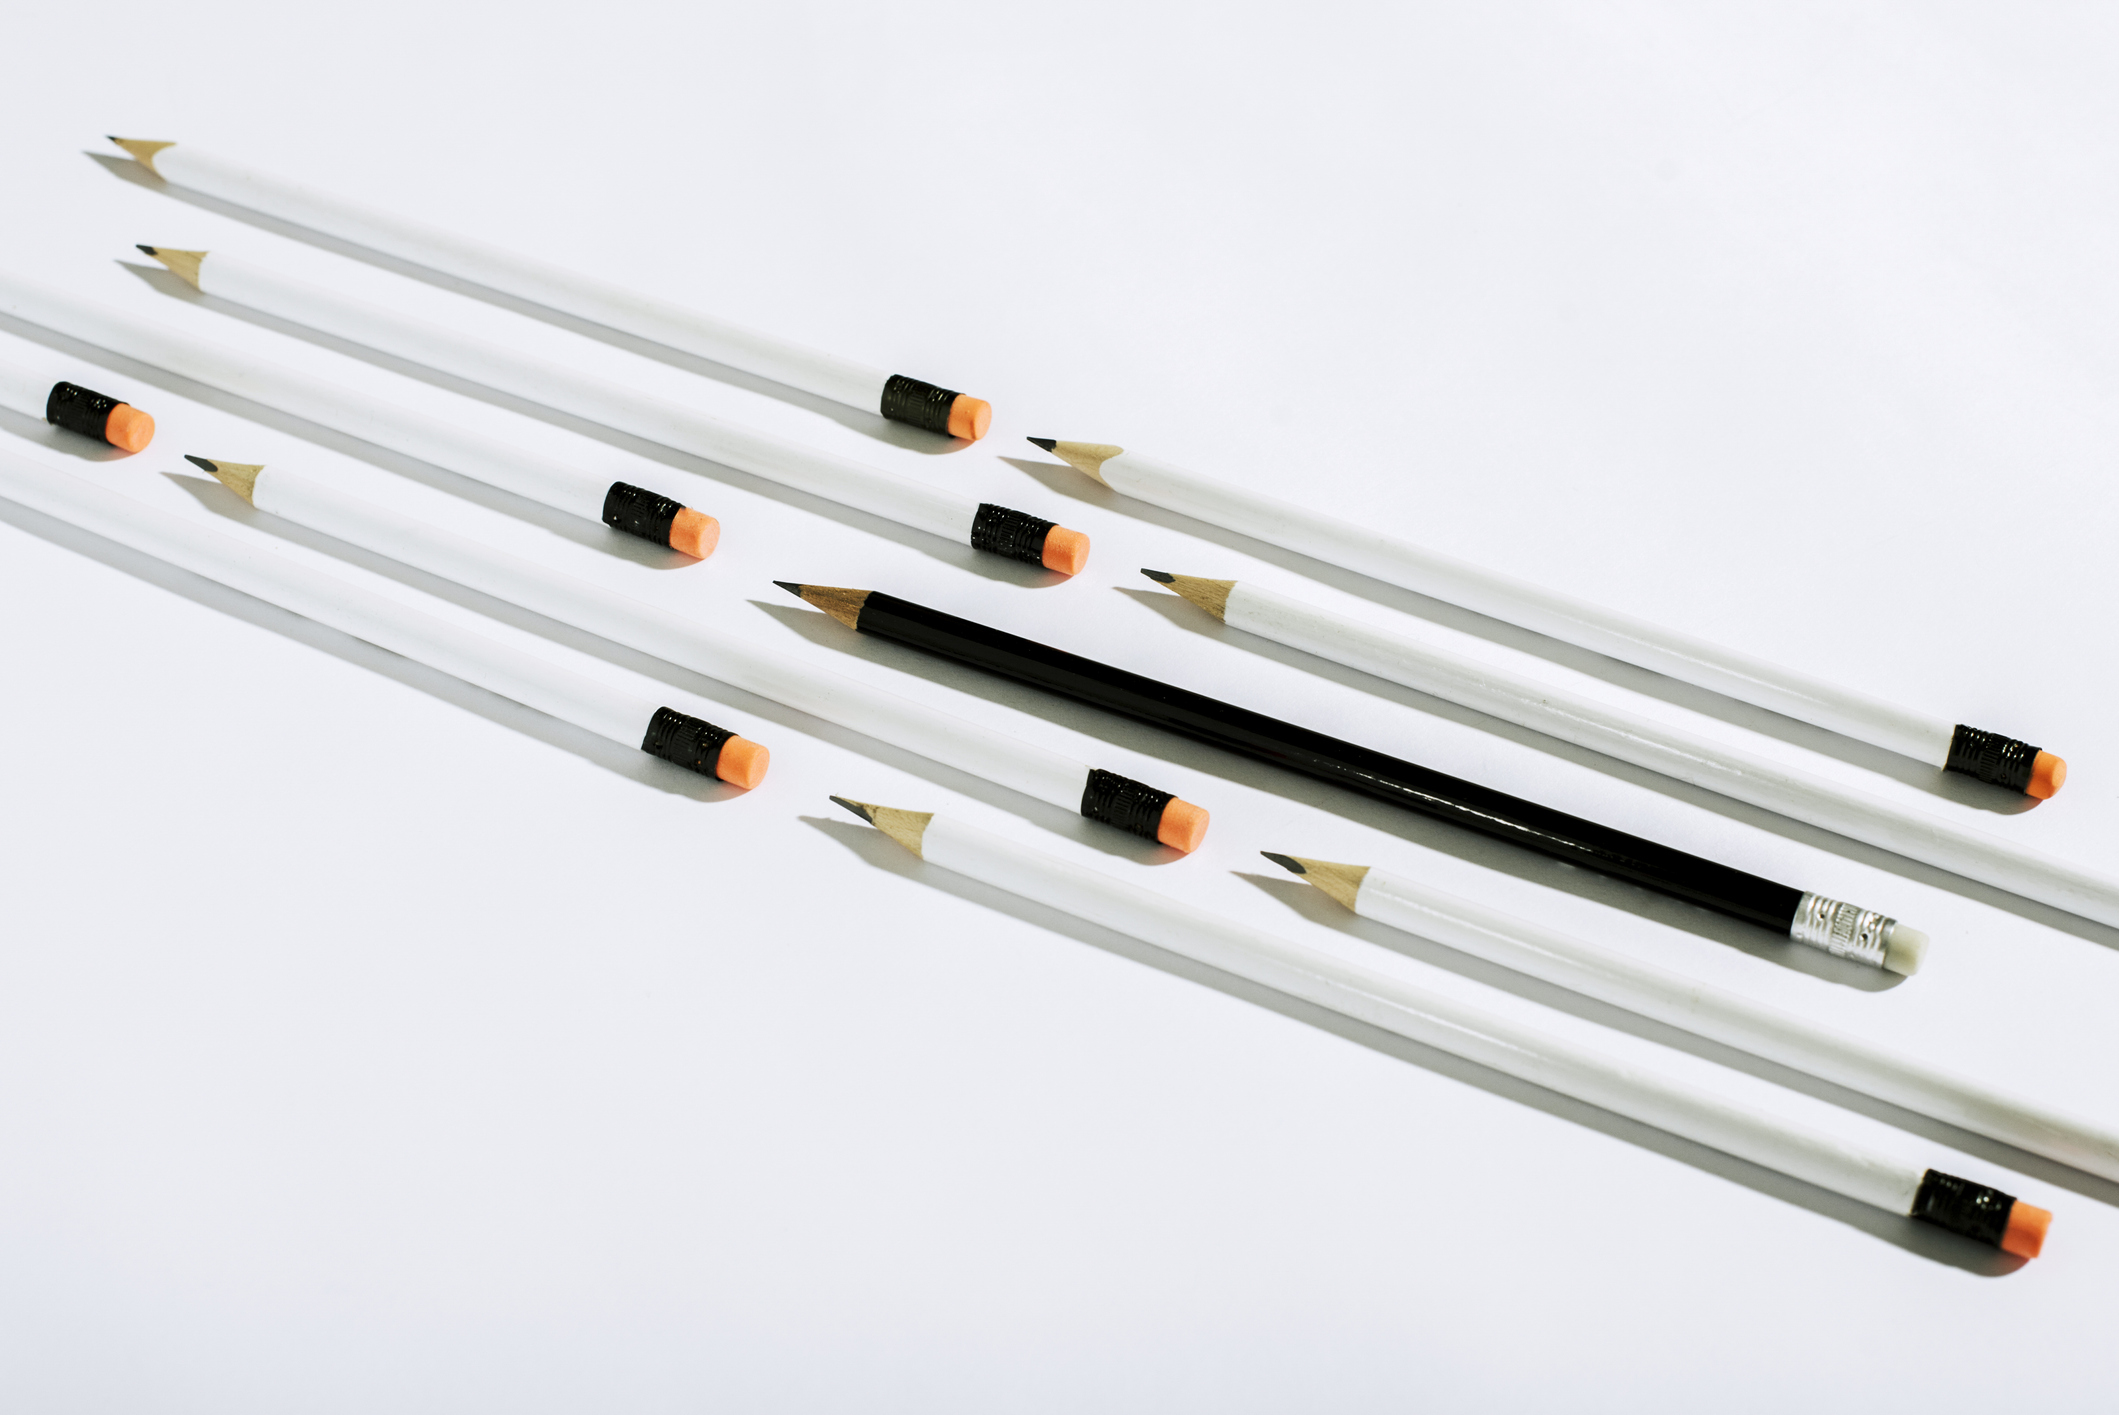 Row of white pencils and a black pencil, located on a white background